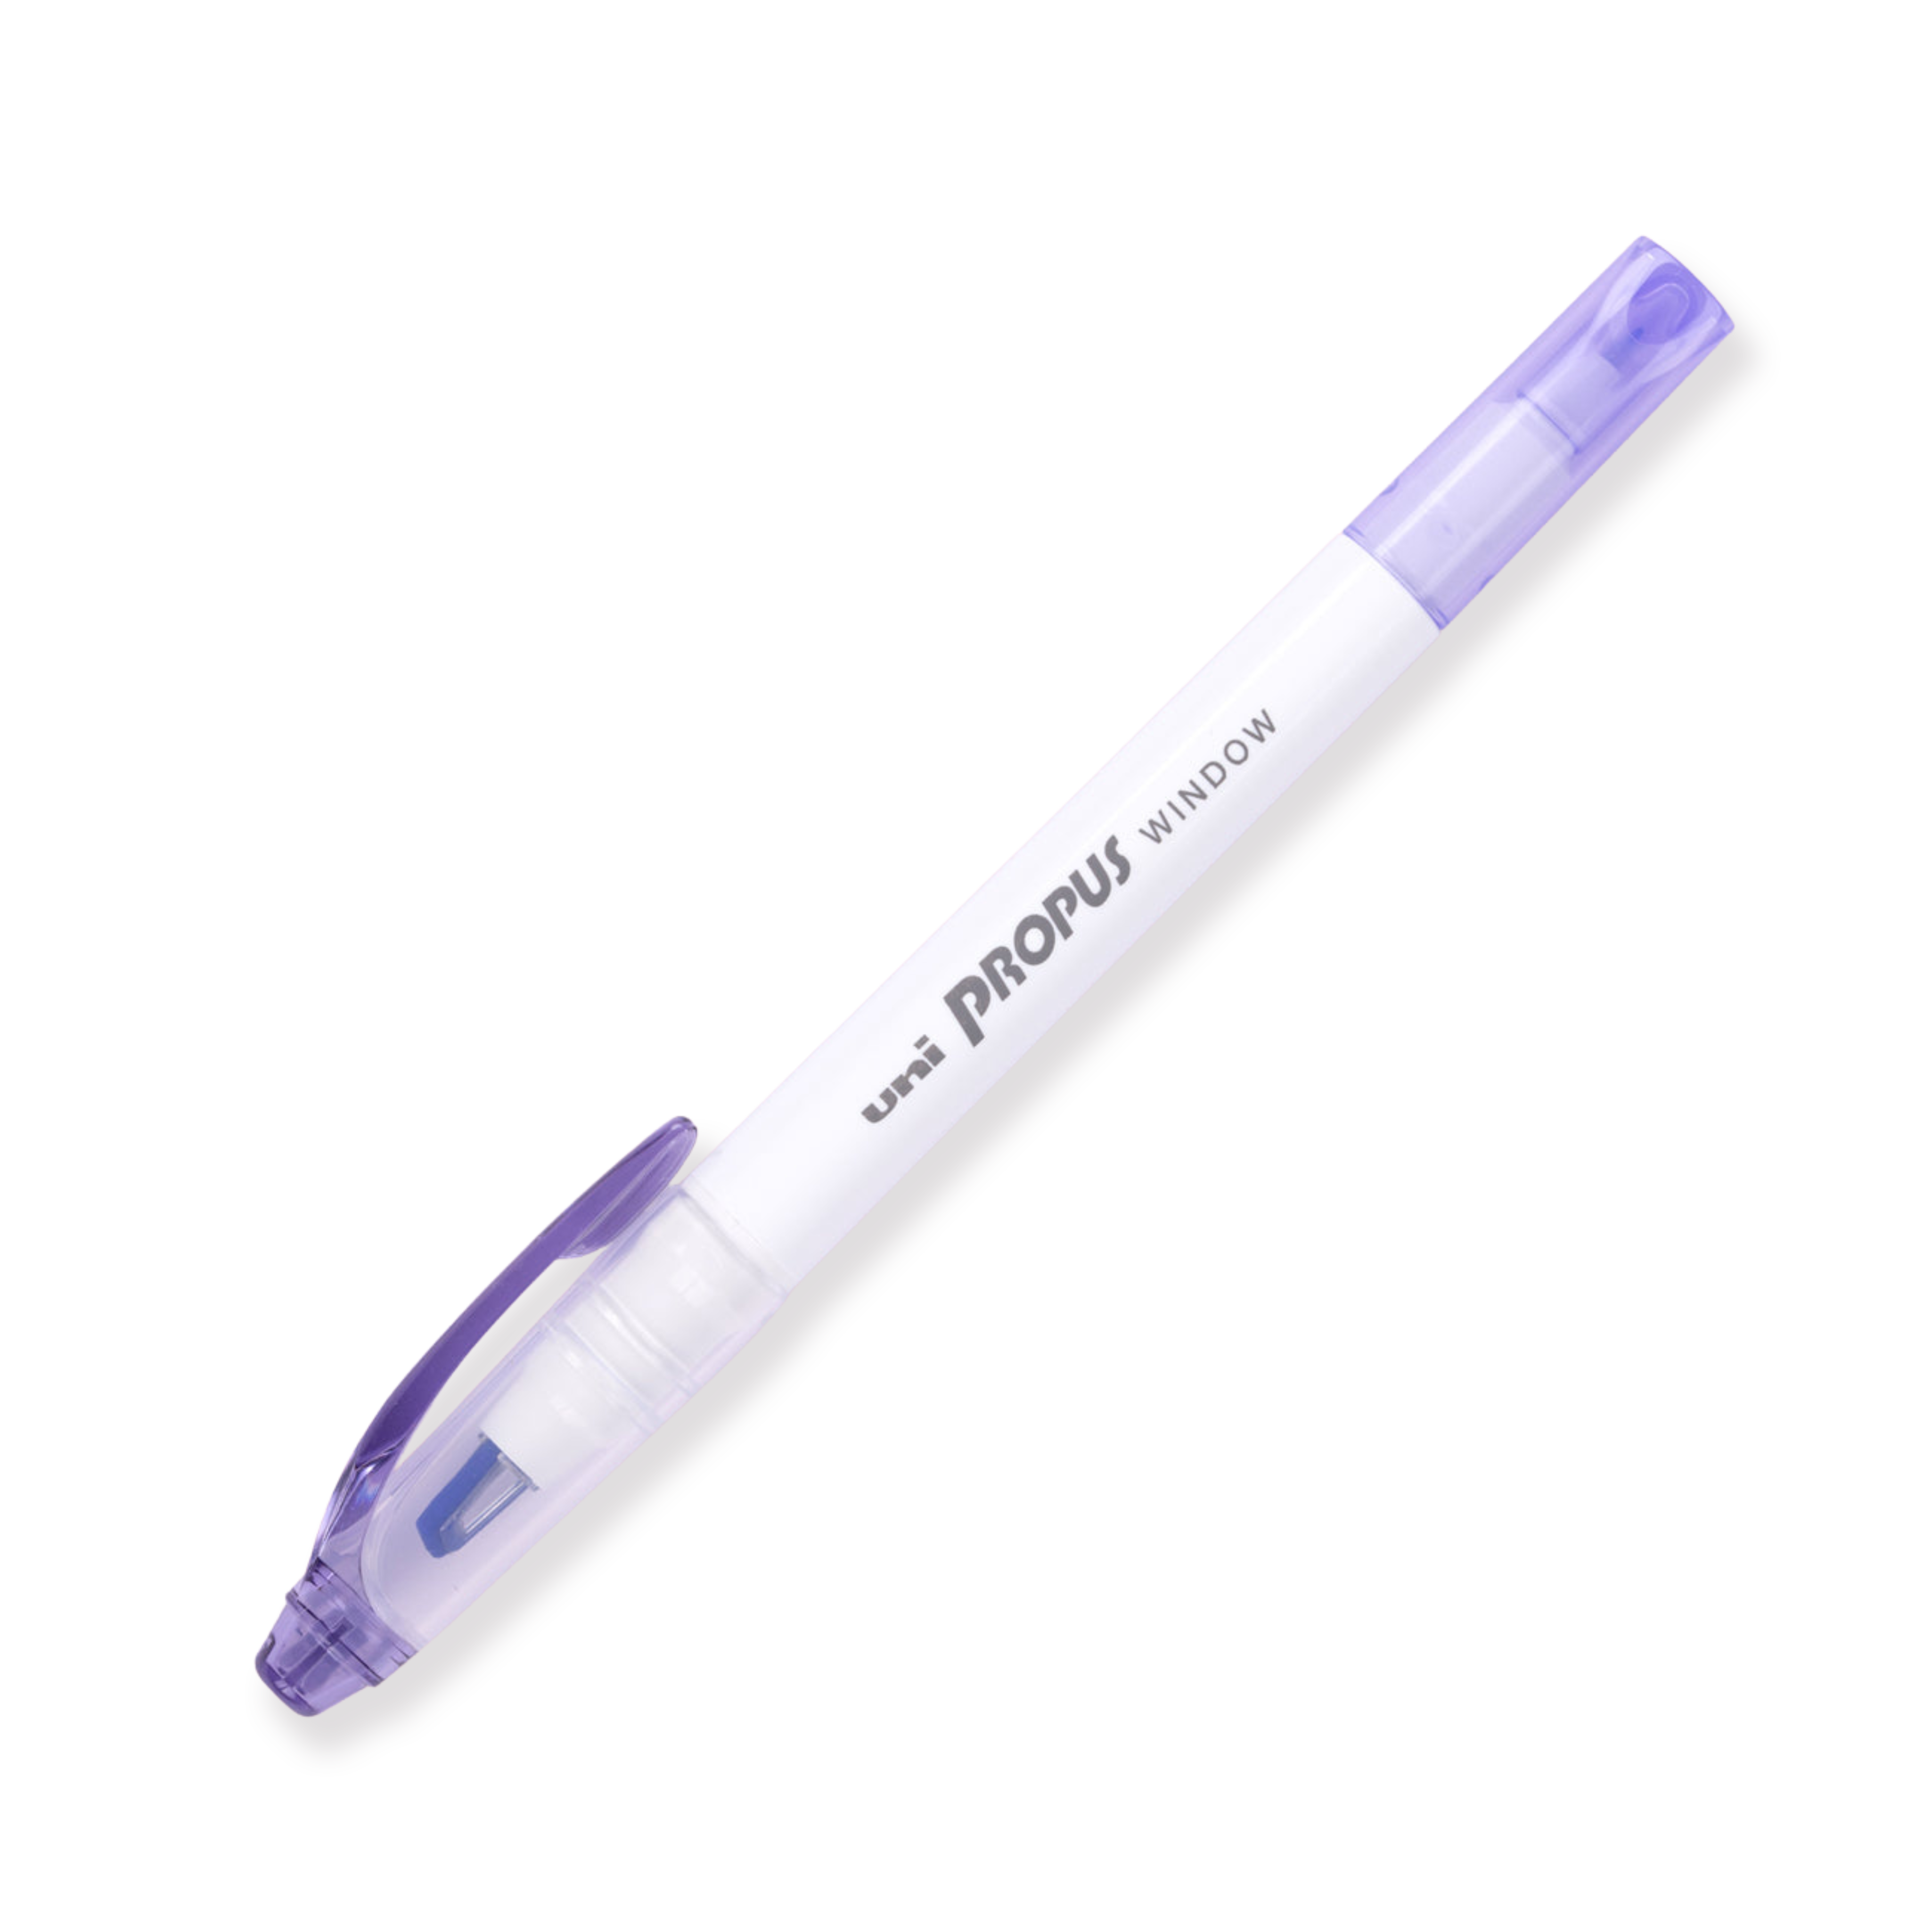 Uni Propus Window Double-Sided Highlighter - Light Violet - 2020 New Color